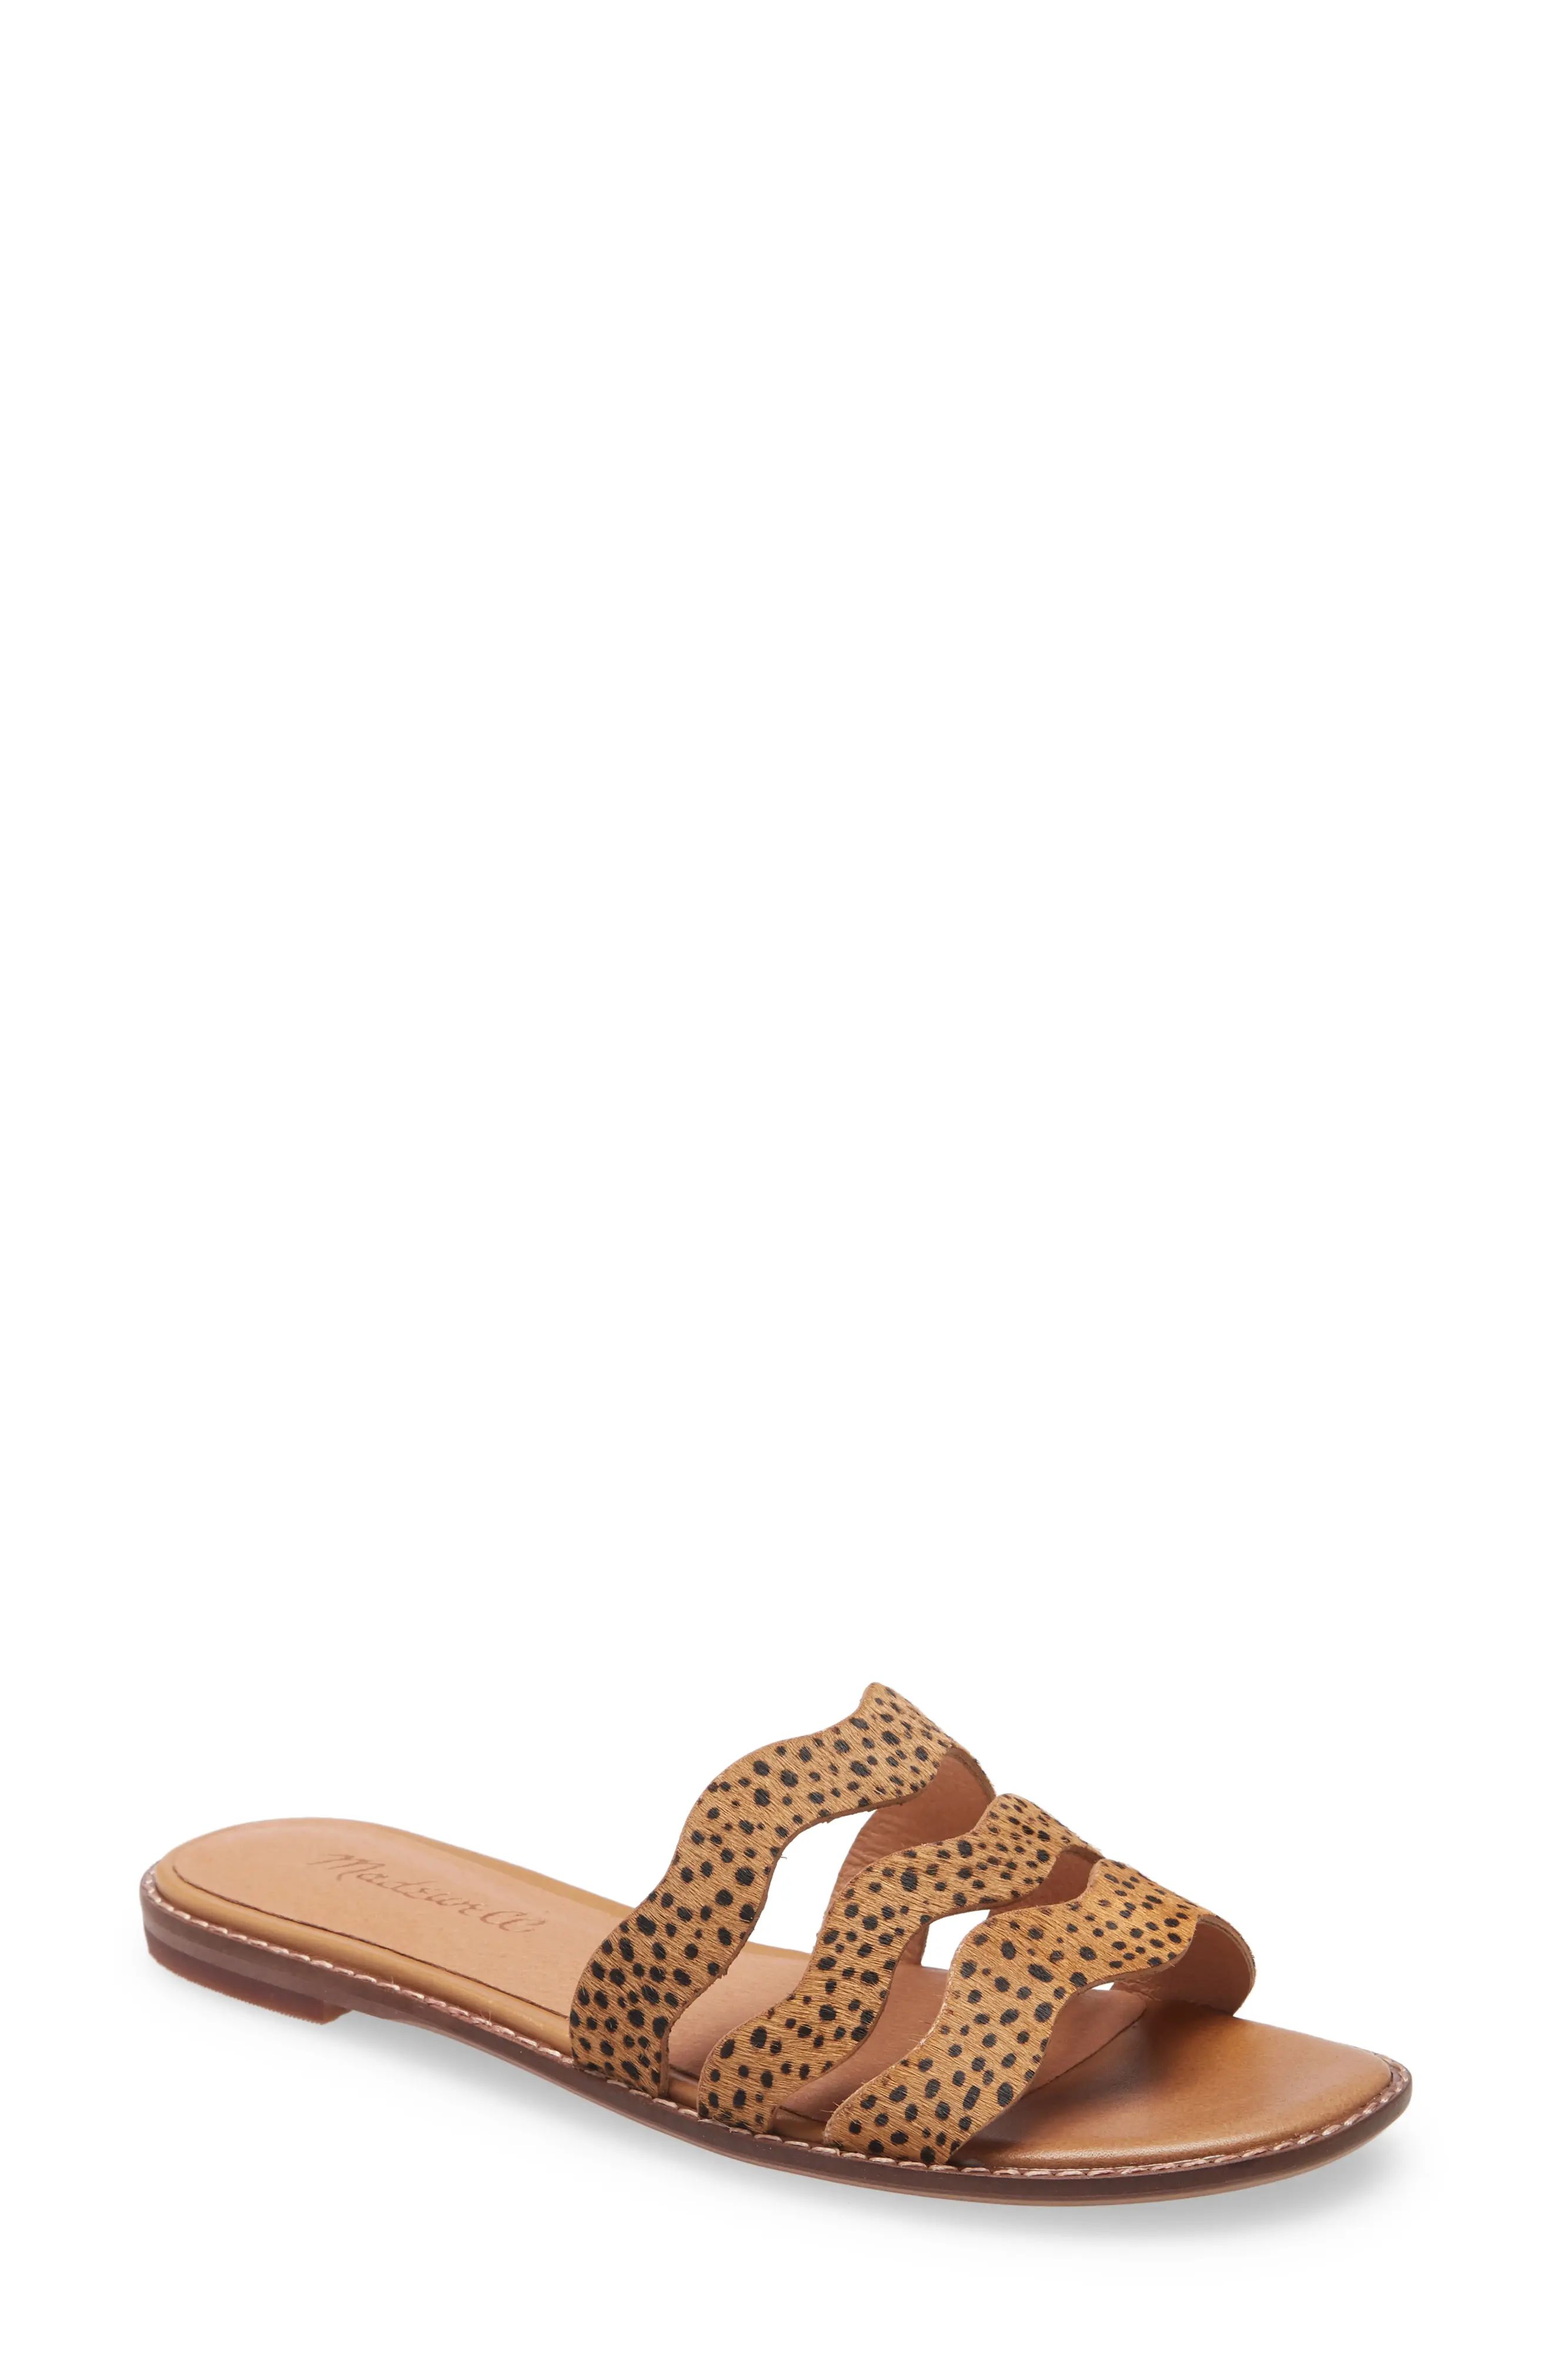 Madewell The Wave Slide Sandal in Tigers Eye Calf Hair at Nordstrom, Size 6 | Nordstrom